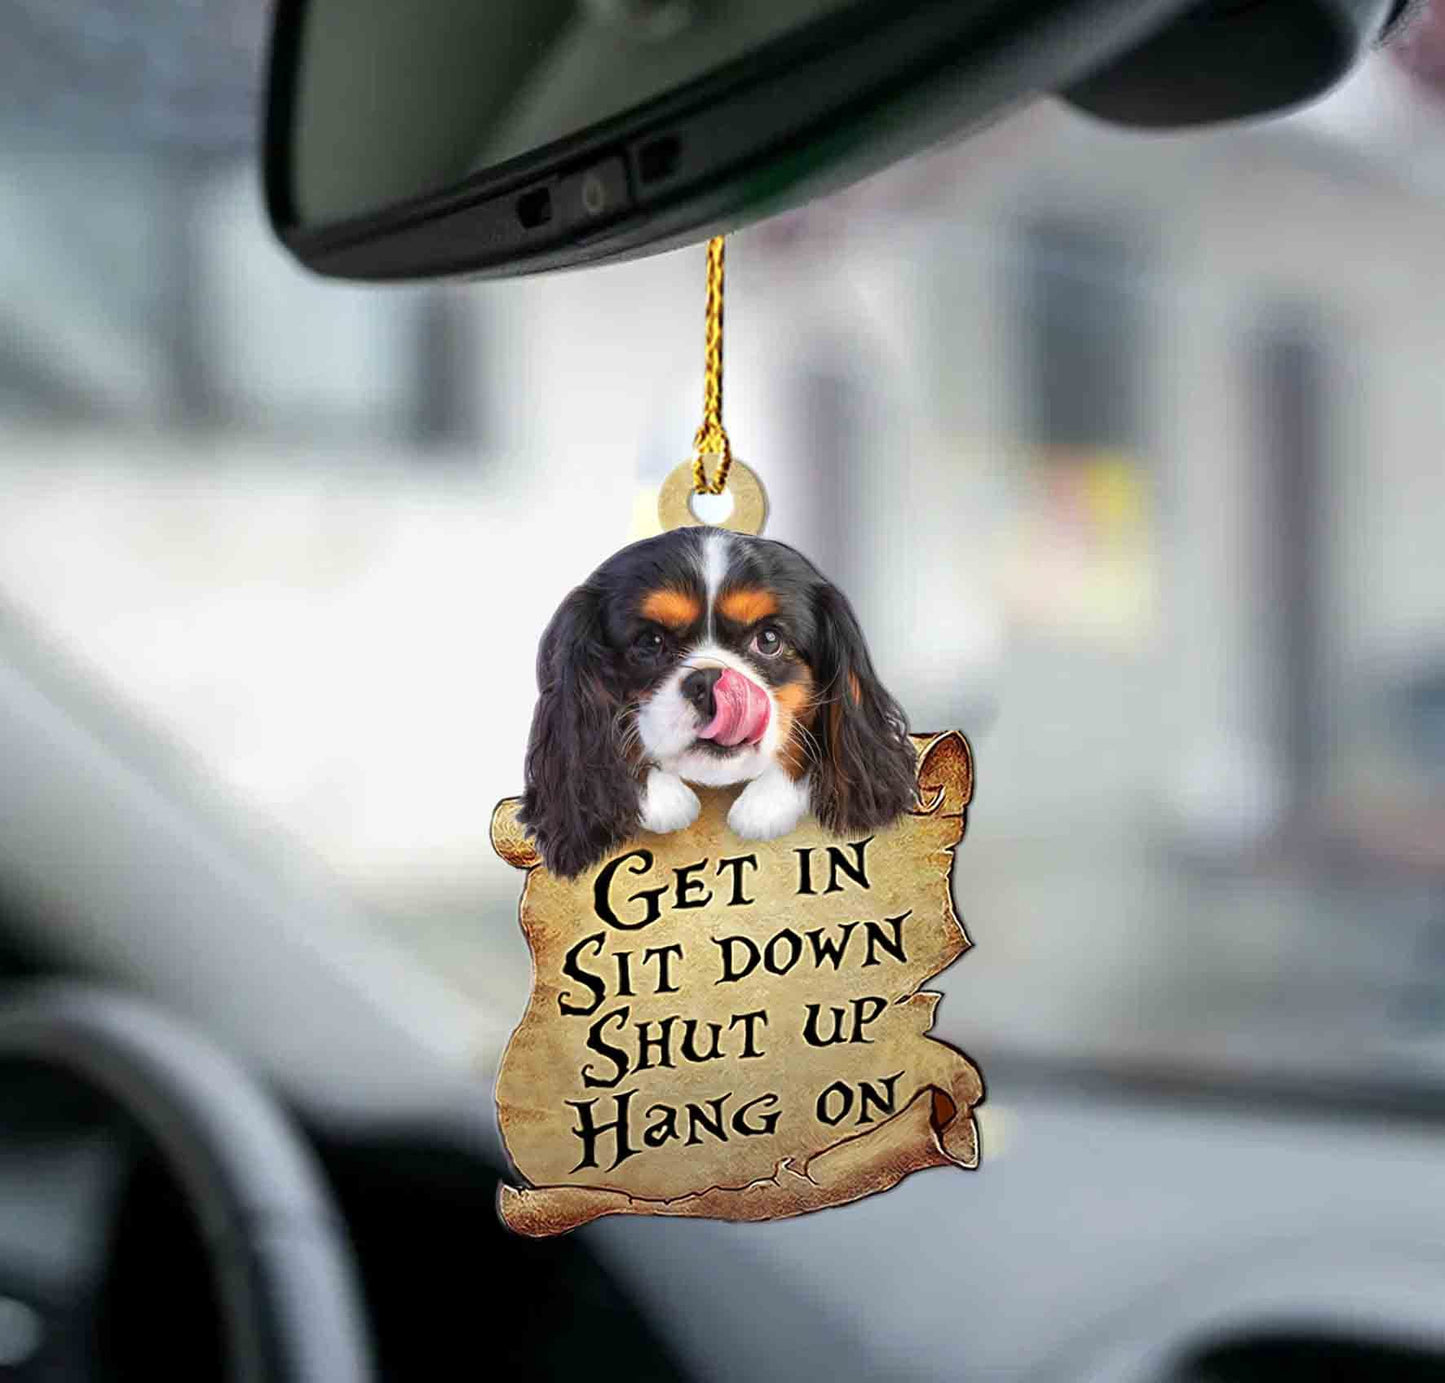 Car Pendant And Home Decor Hanging Ornaments For Animal Lovers